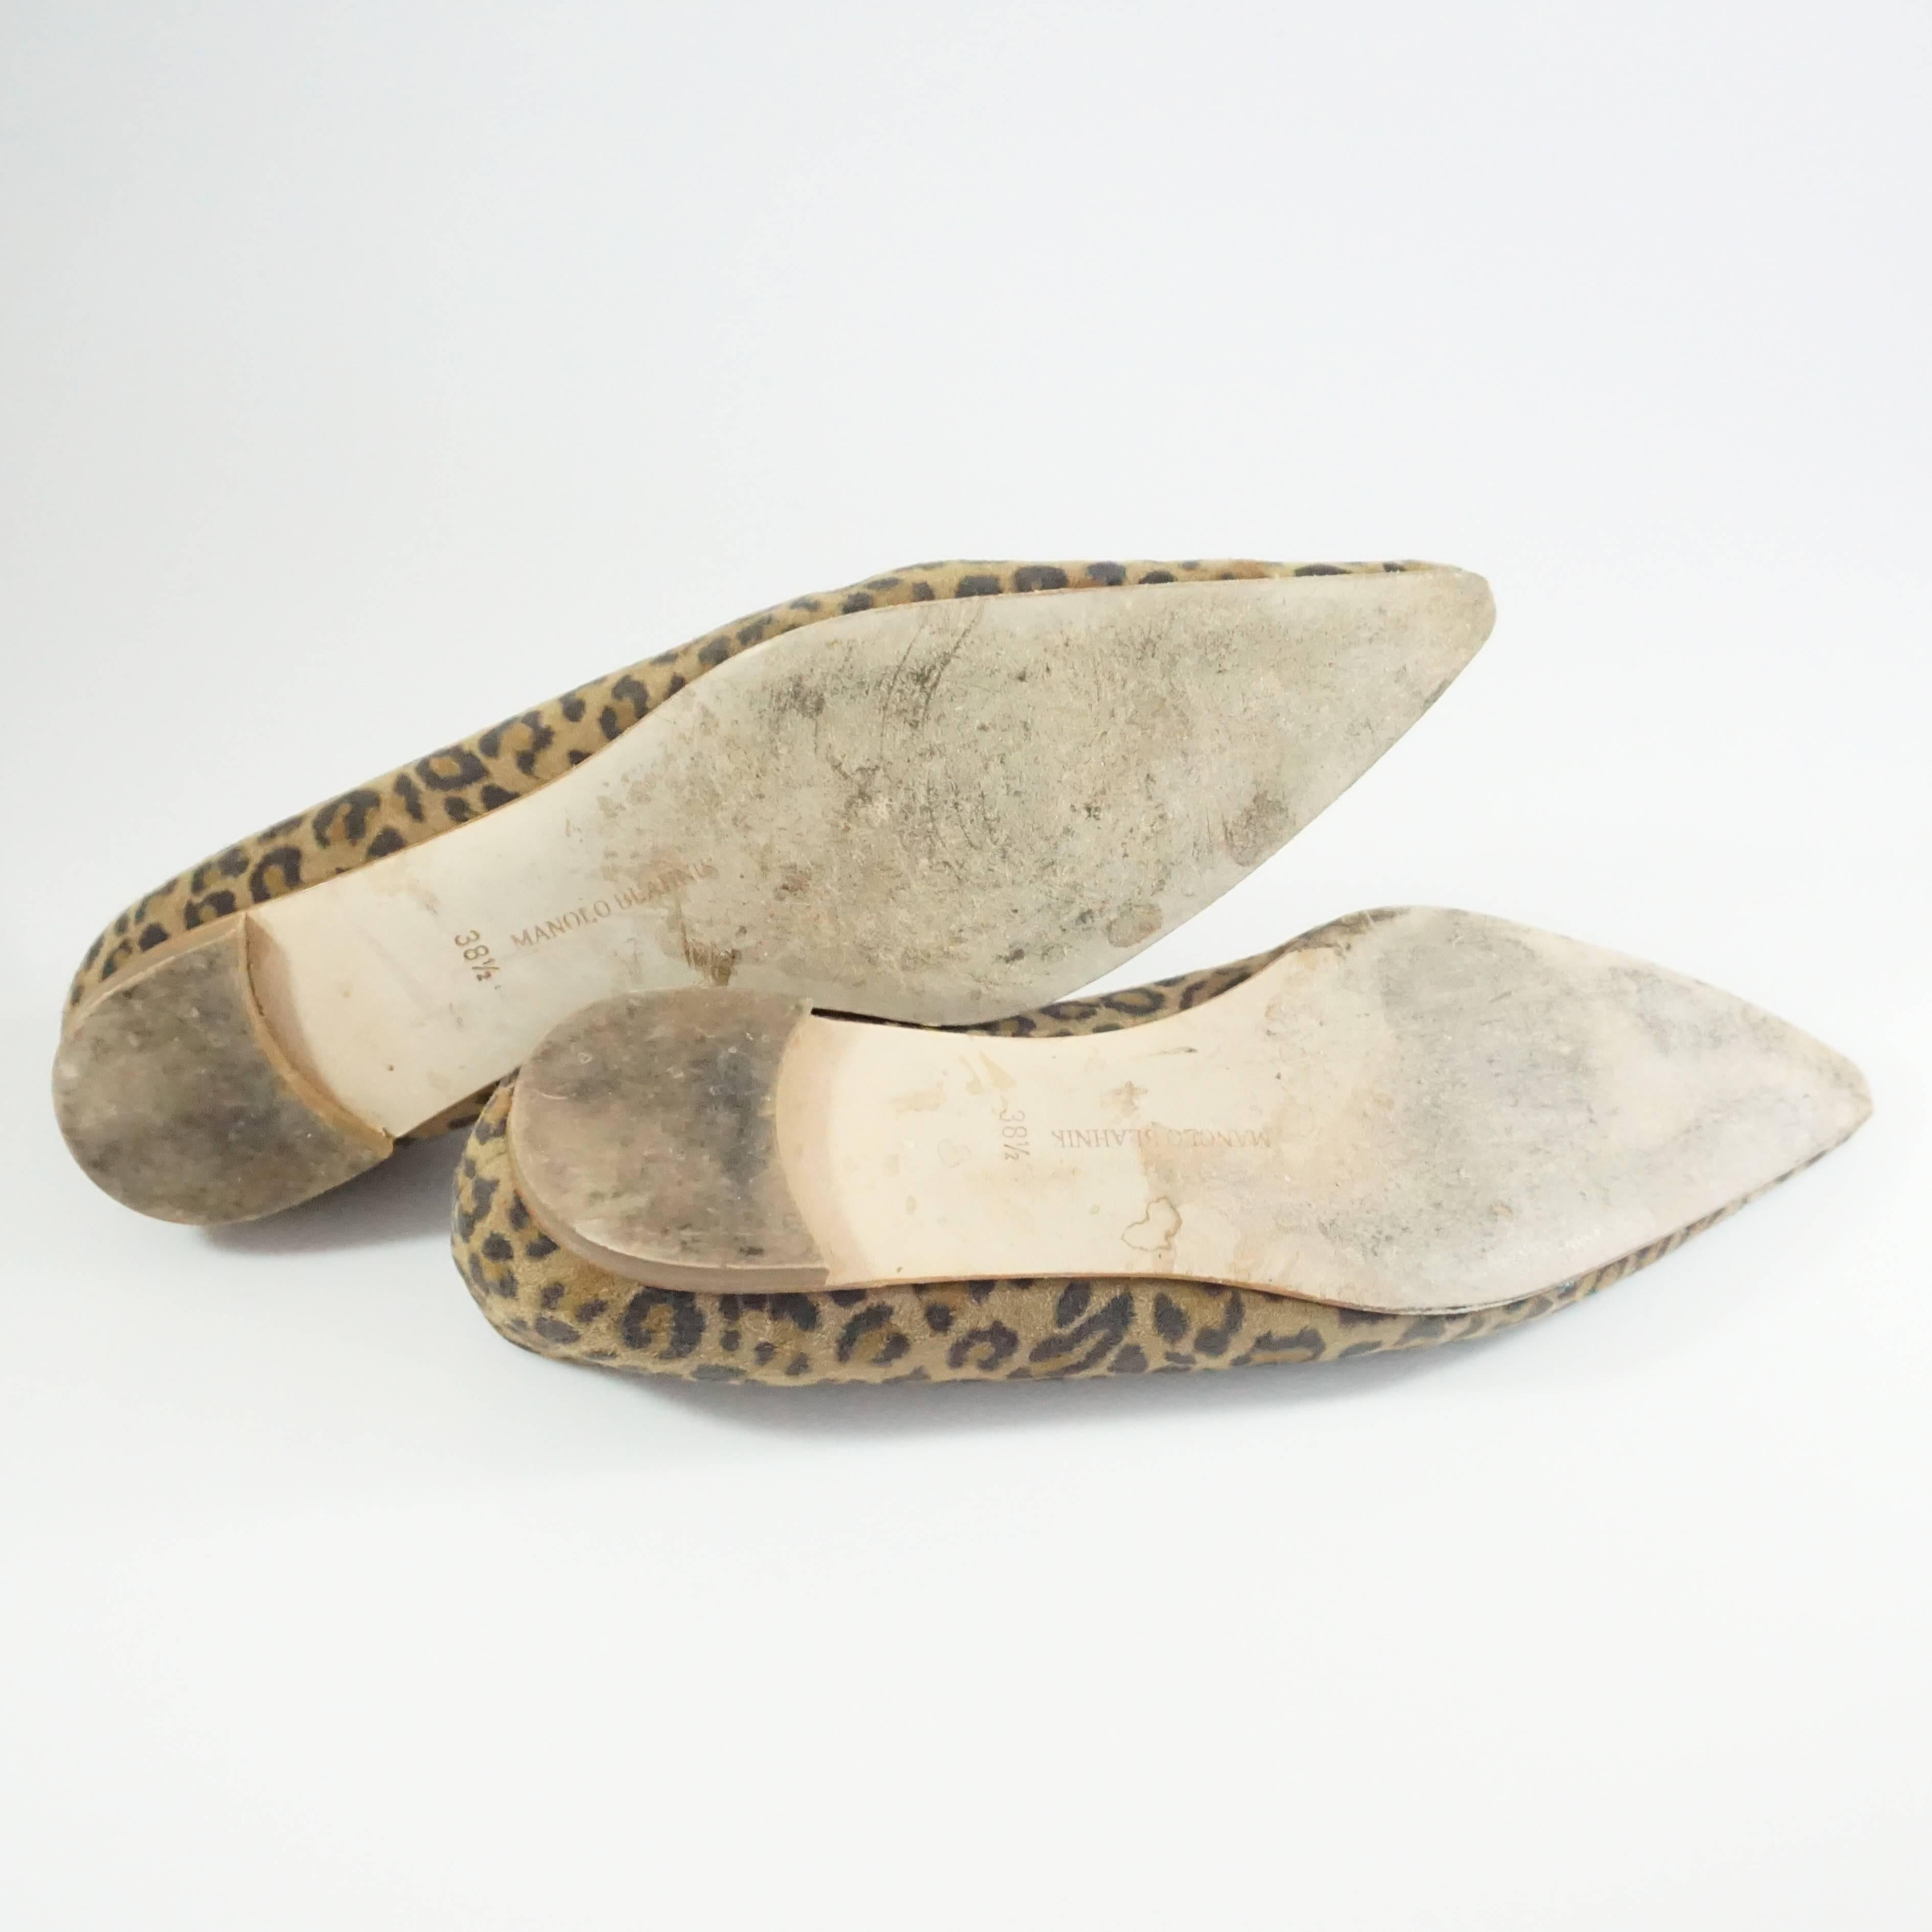 Manolo Blahnik Animal Print Suede Flats - 38.5 In Good Condition For Sale In West Palm Beach, FL